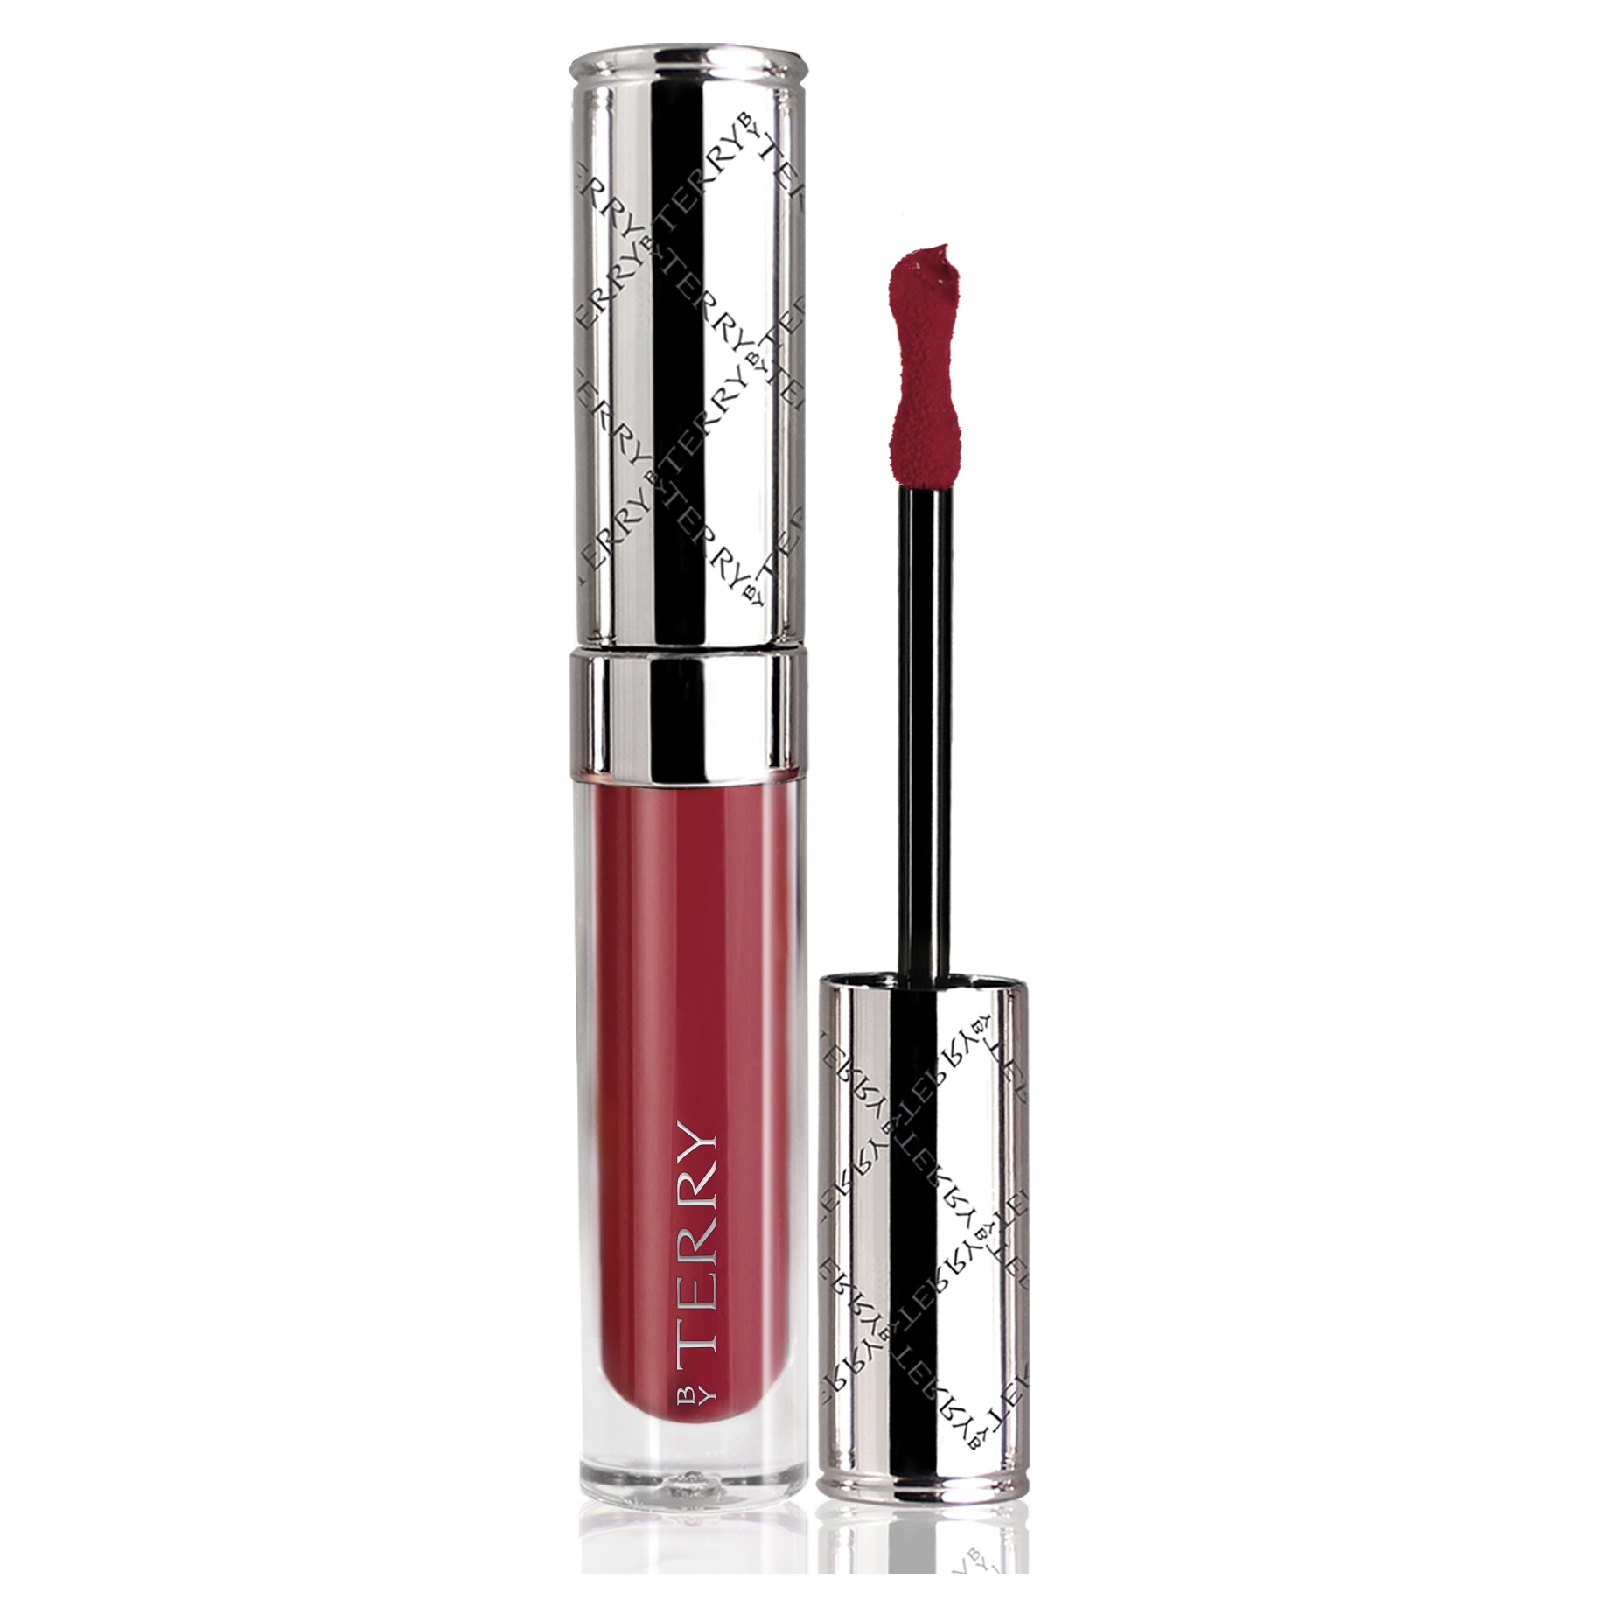 By Terry Terrybly Velvet Rouge Lipstick 2ml (Various Shades) - 4. Bohemian Plum